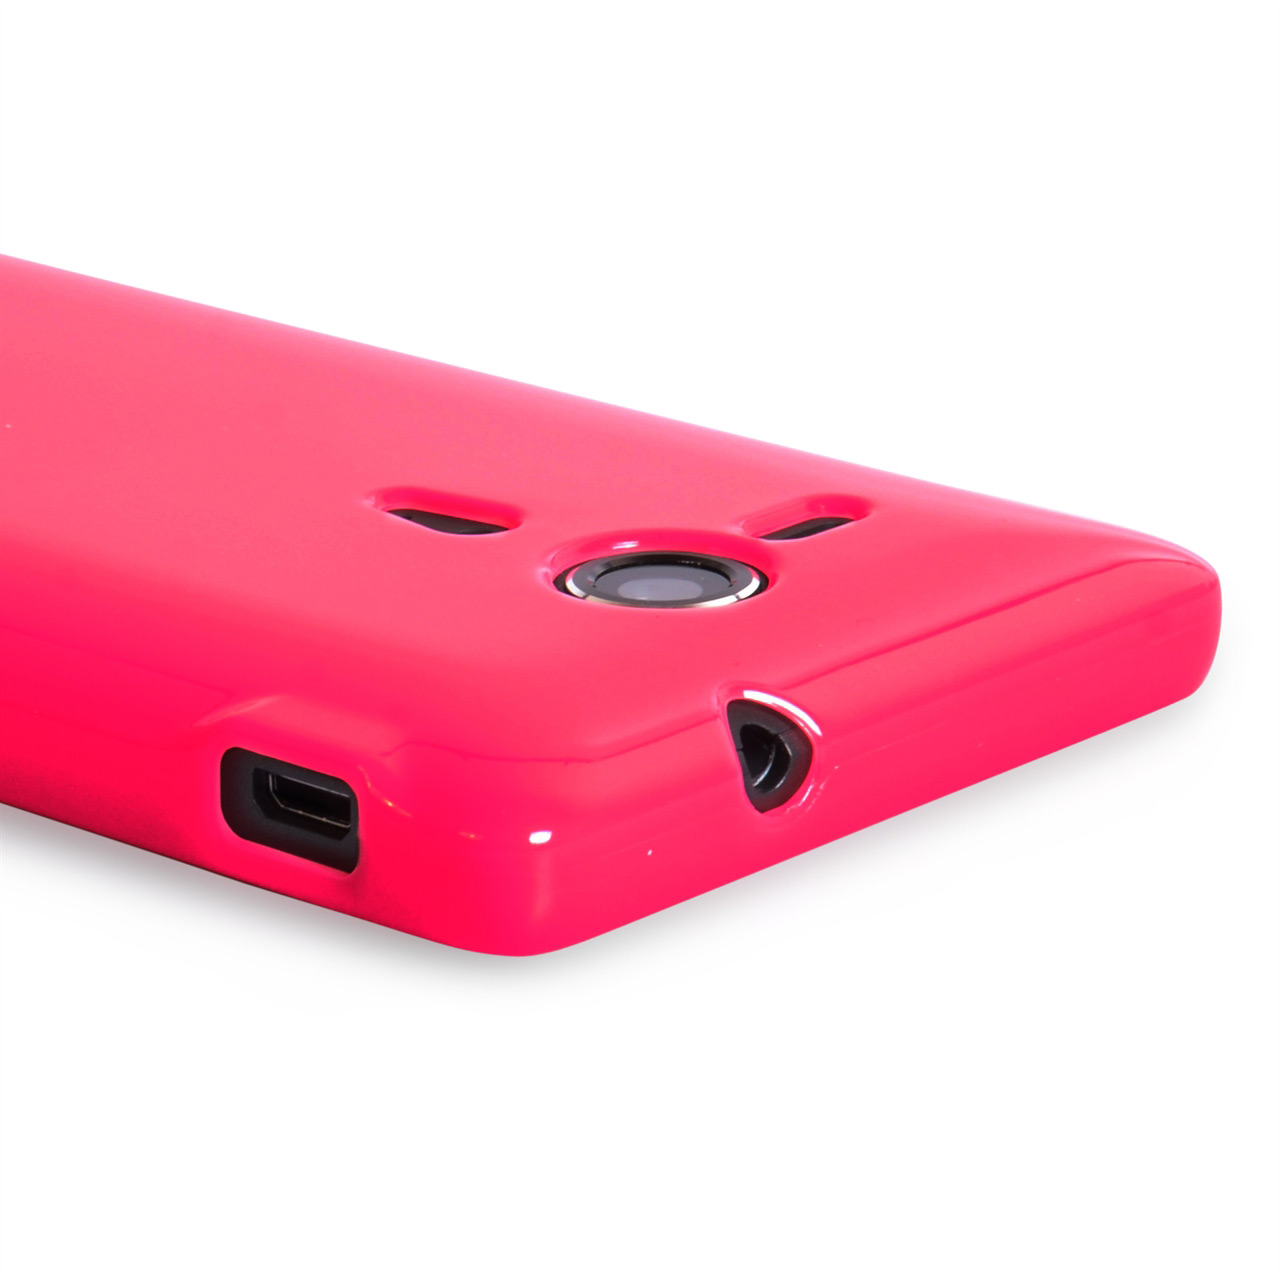 YouSave Accessories Sony Xperia SP Silicone Gel Case - Pink